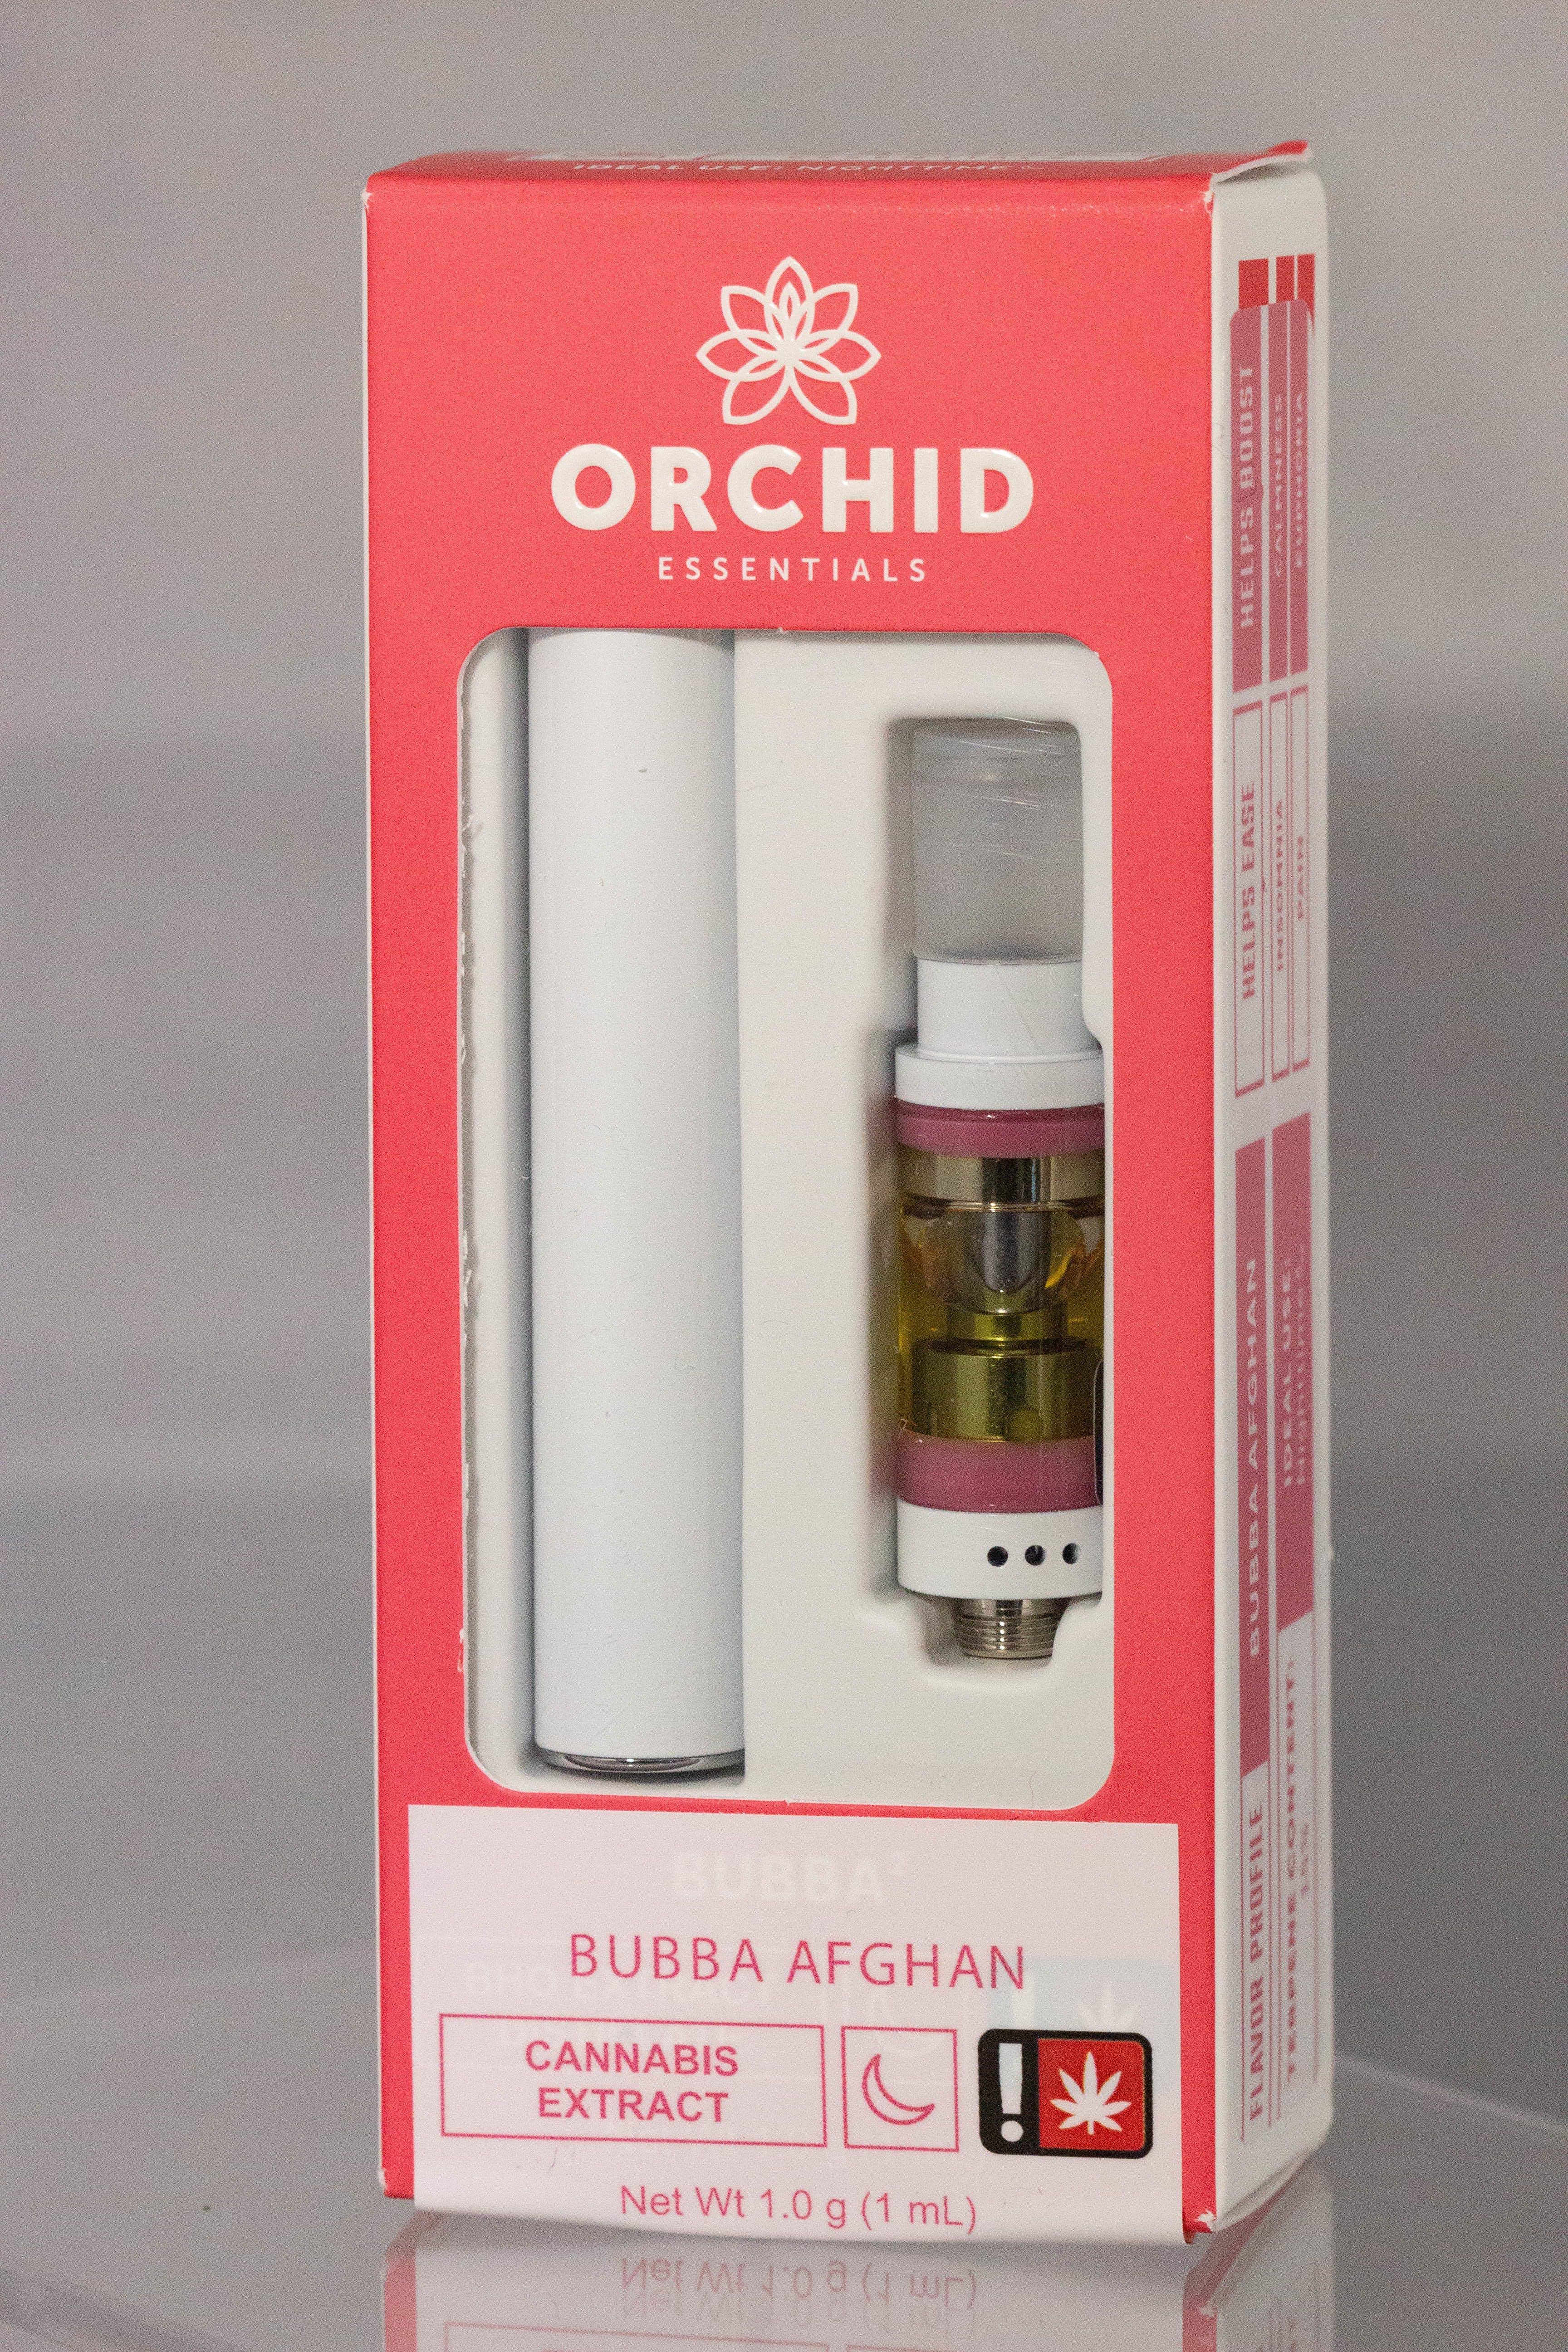 wax-bubba-afghan-1g-vape-kit-by-orchid-essentials